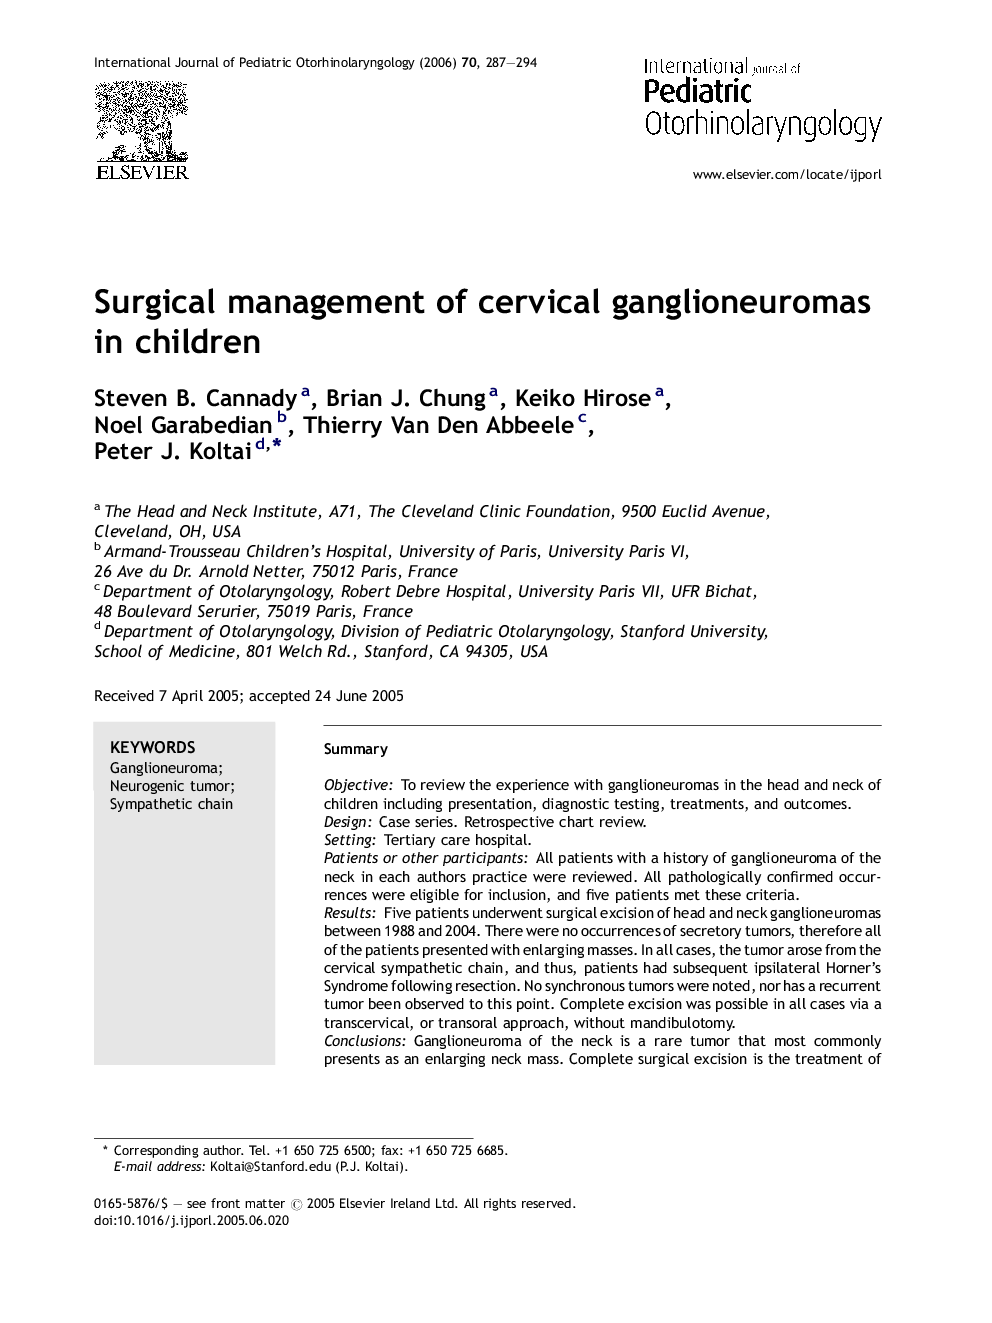 Surgical management of cervical ganglioneuromas in children